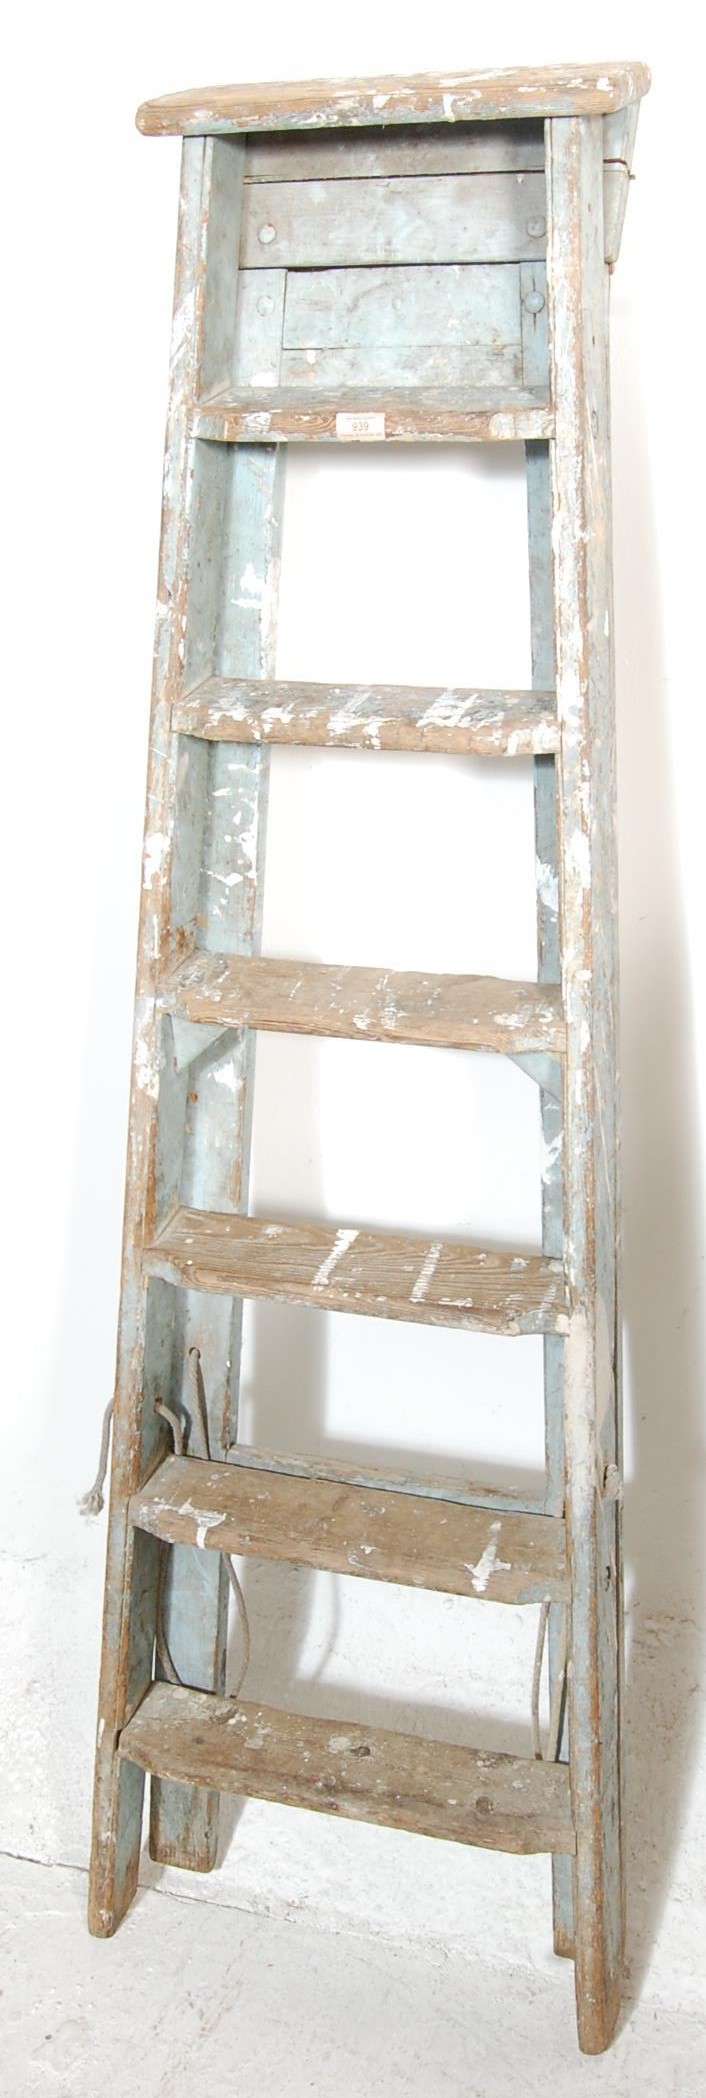 INDUSTRIAL 20TH CENTURY WOODEN FOLDING STEP LADDER - Image 3 of 3